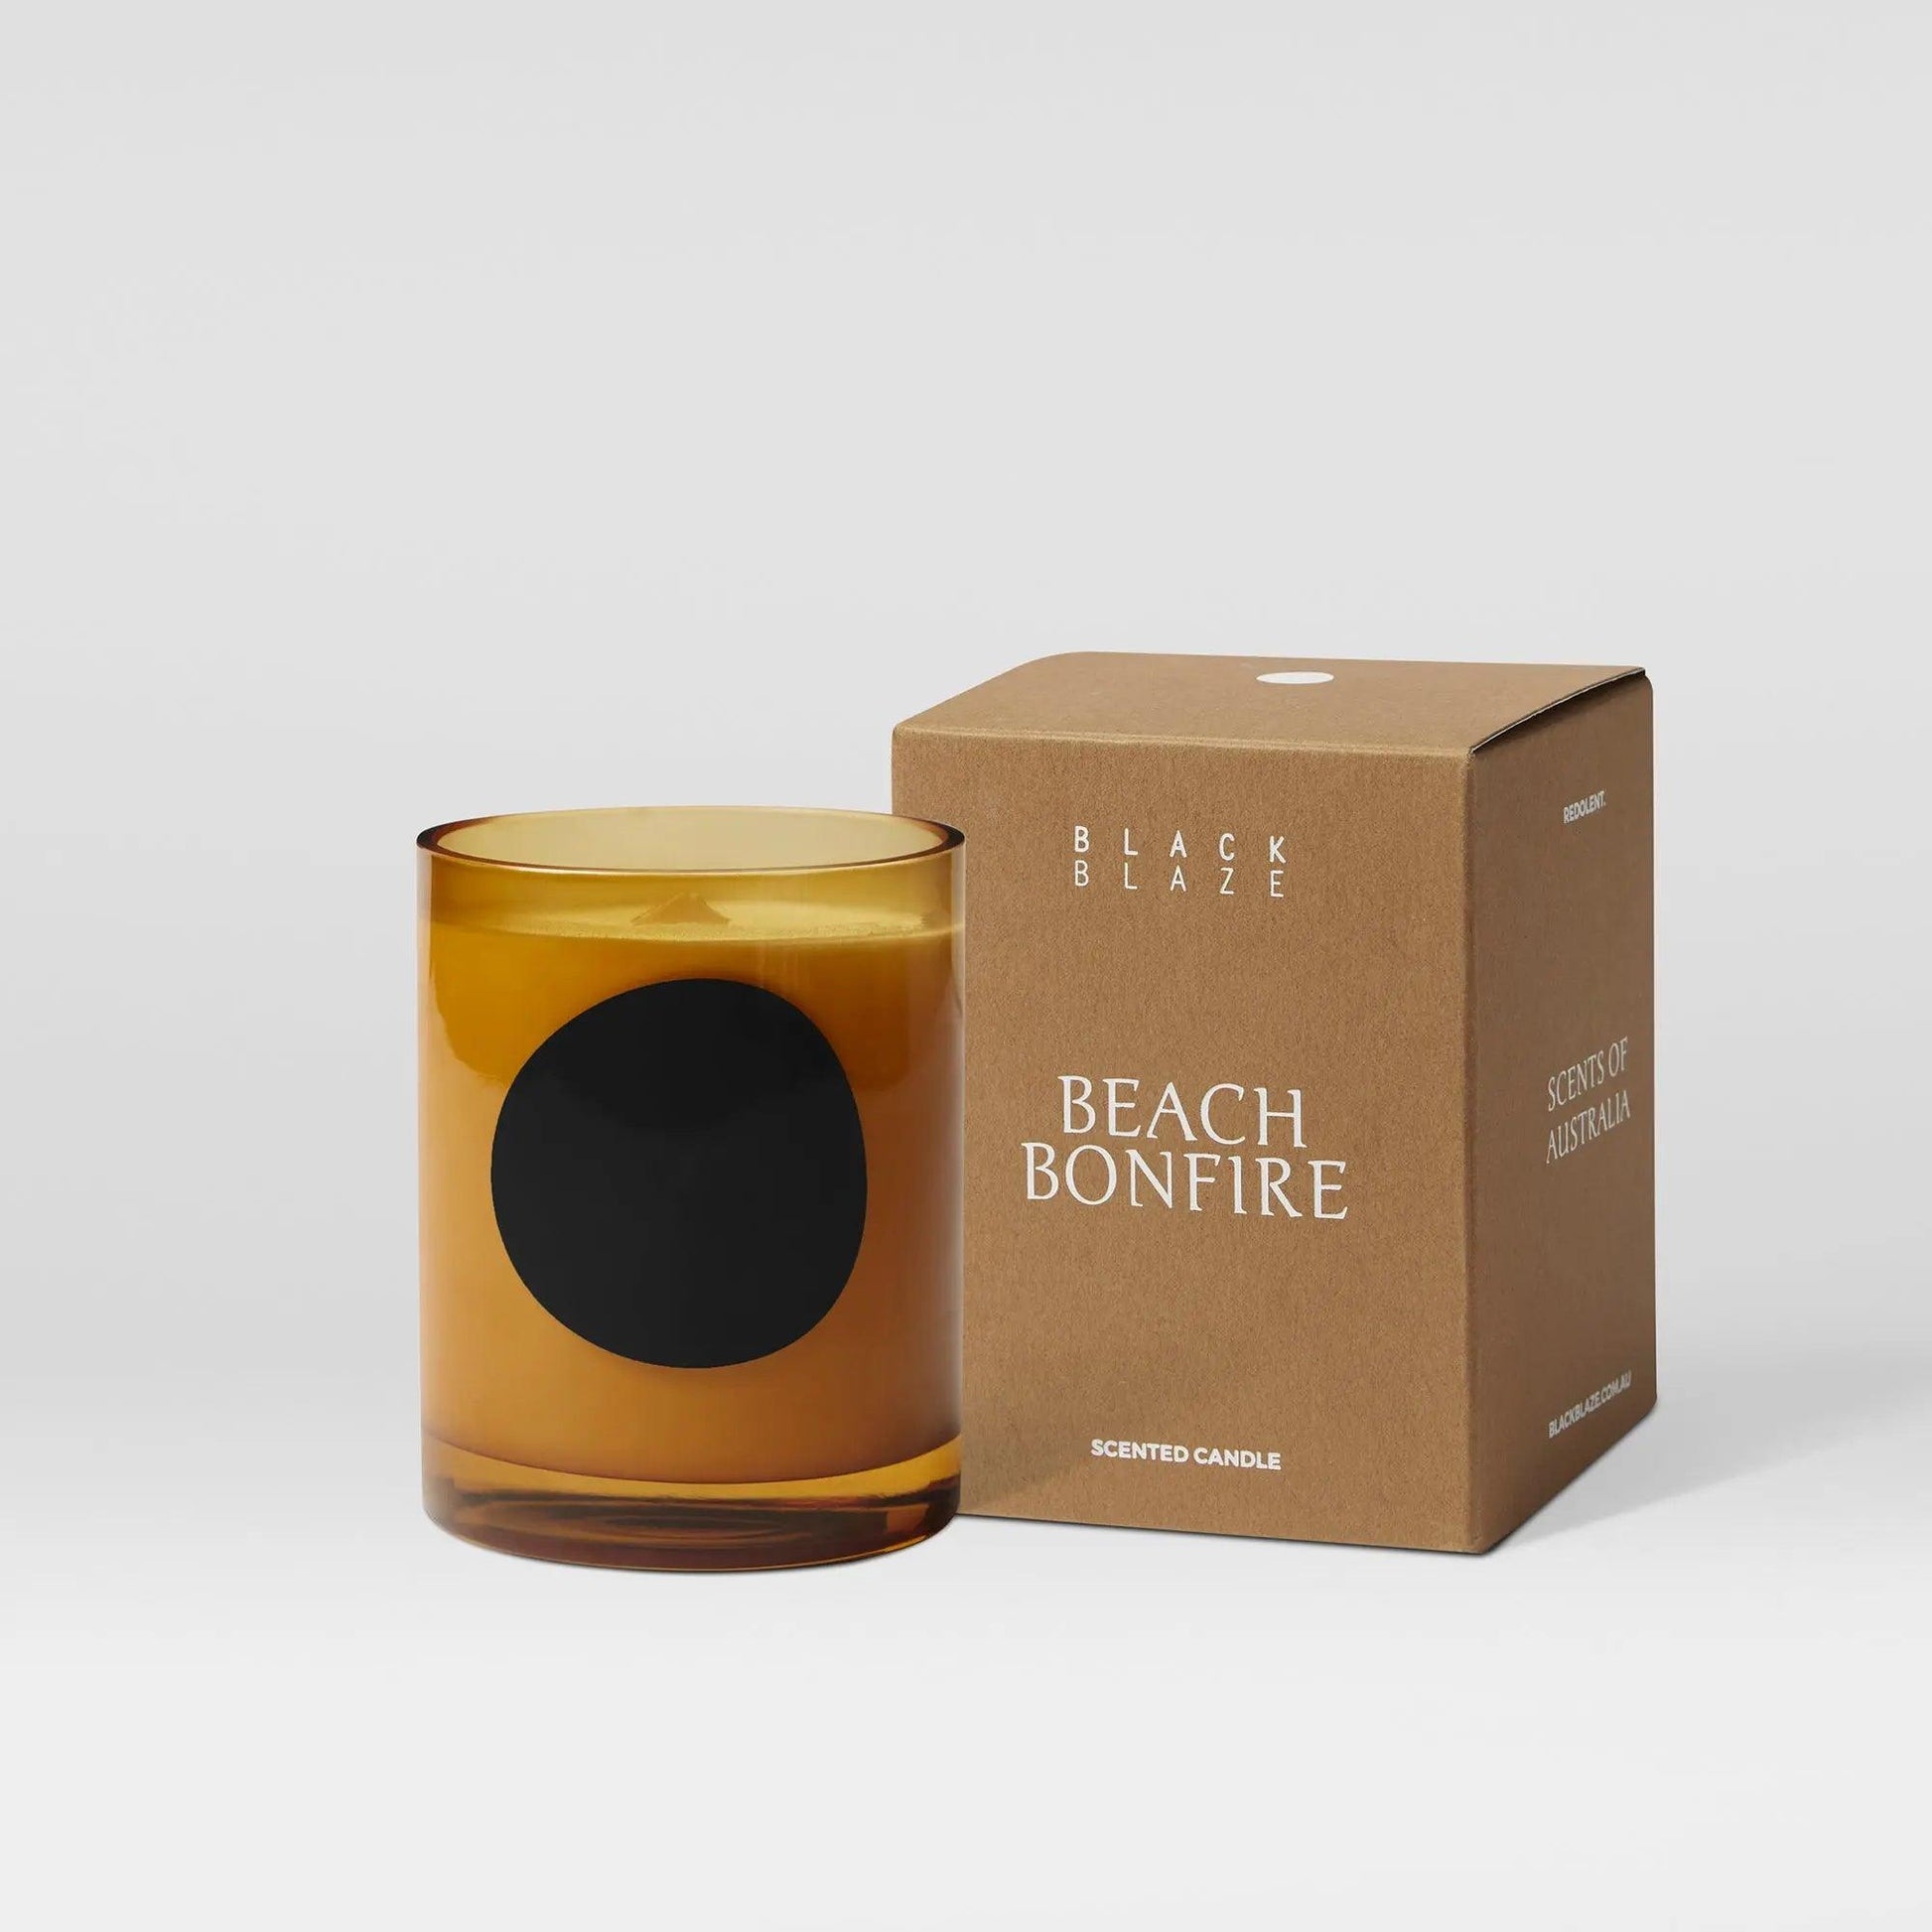 Beach Bonfire Scented Candle 300g - BLACK BLAZE - THE GREAT OUTDOOR COLLECTION - BLACK BLAZE